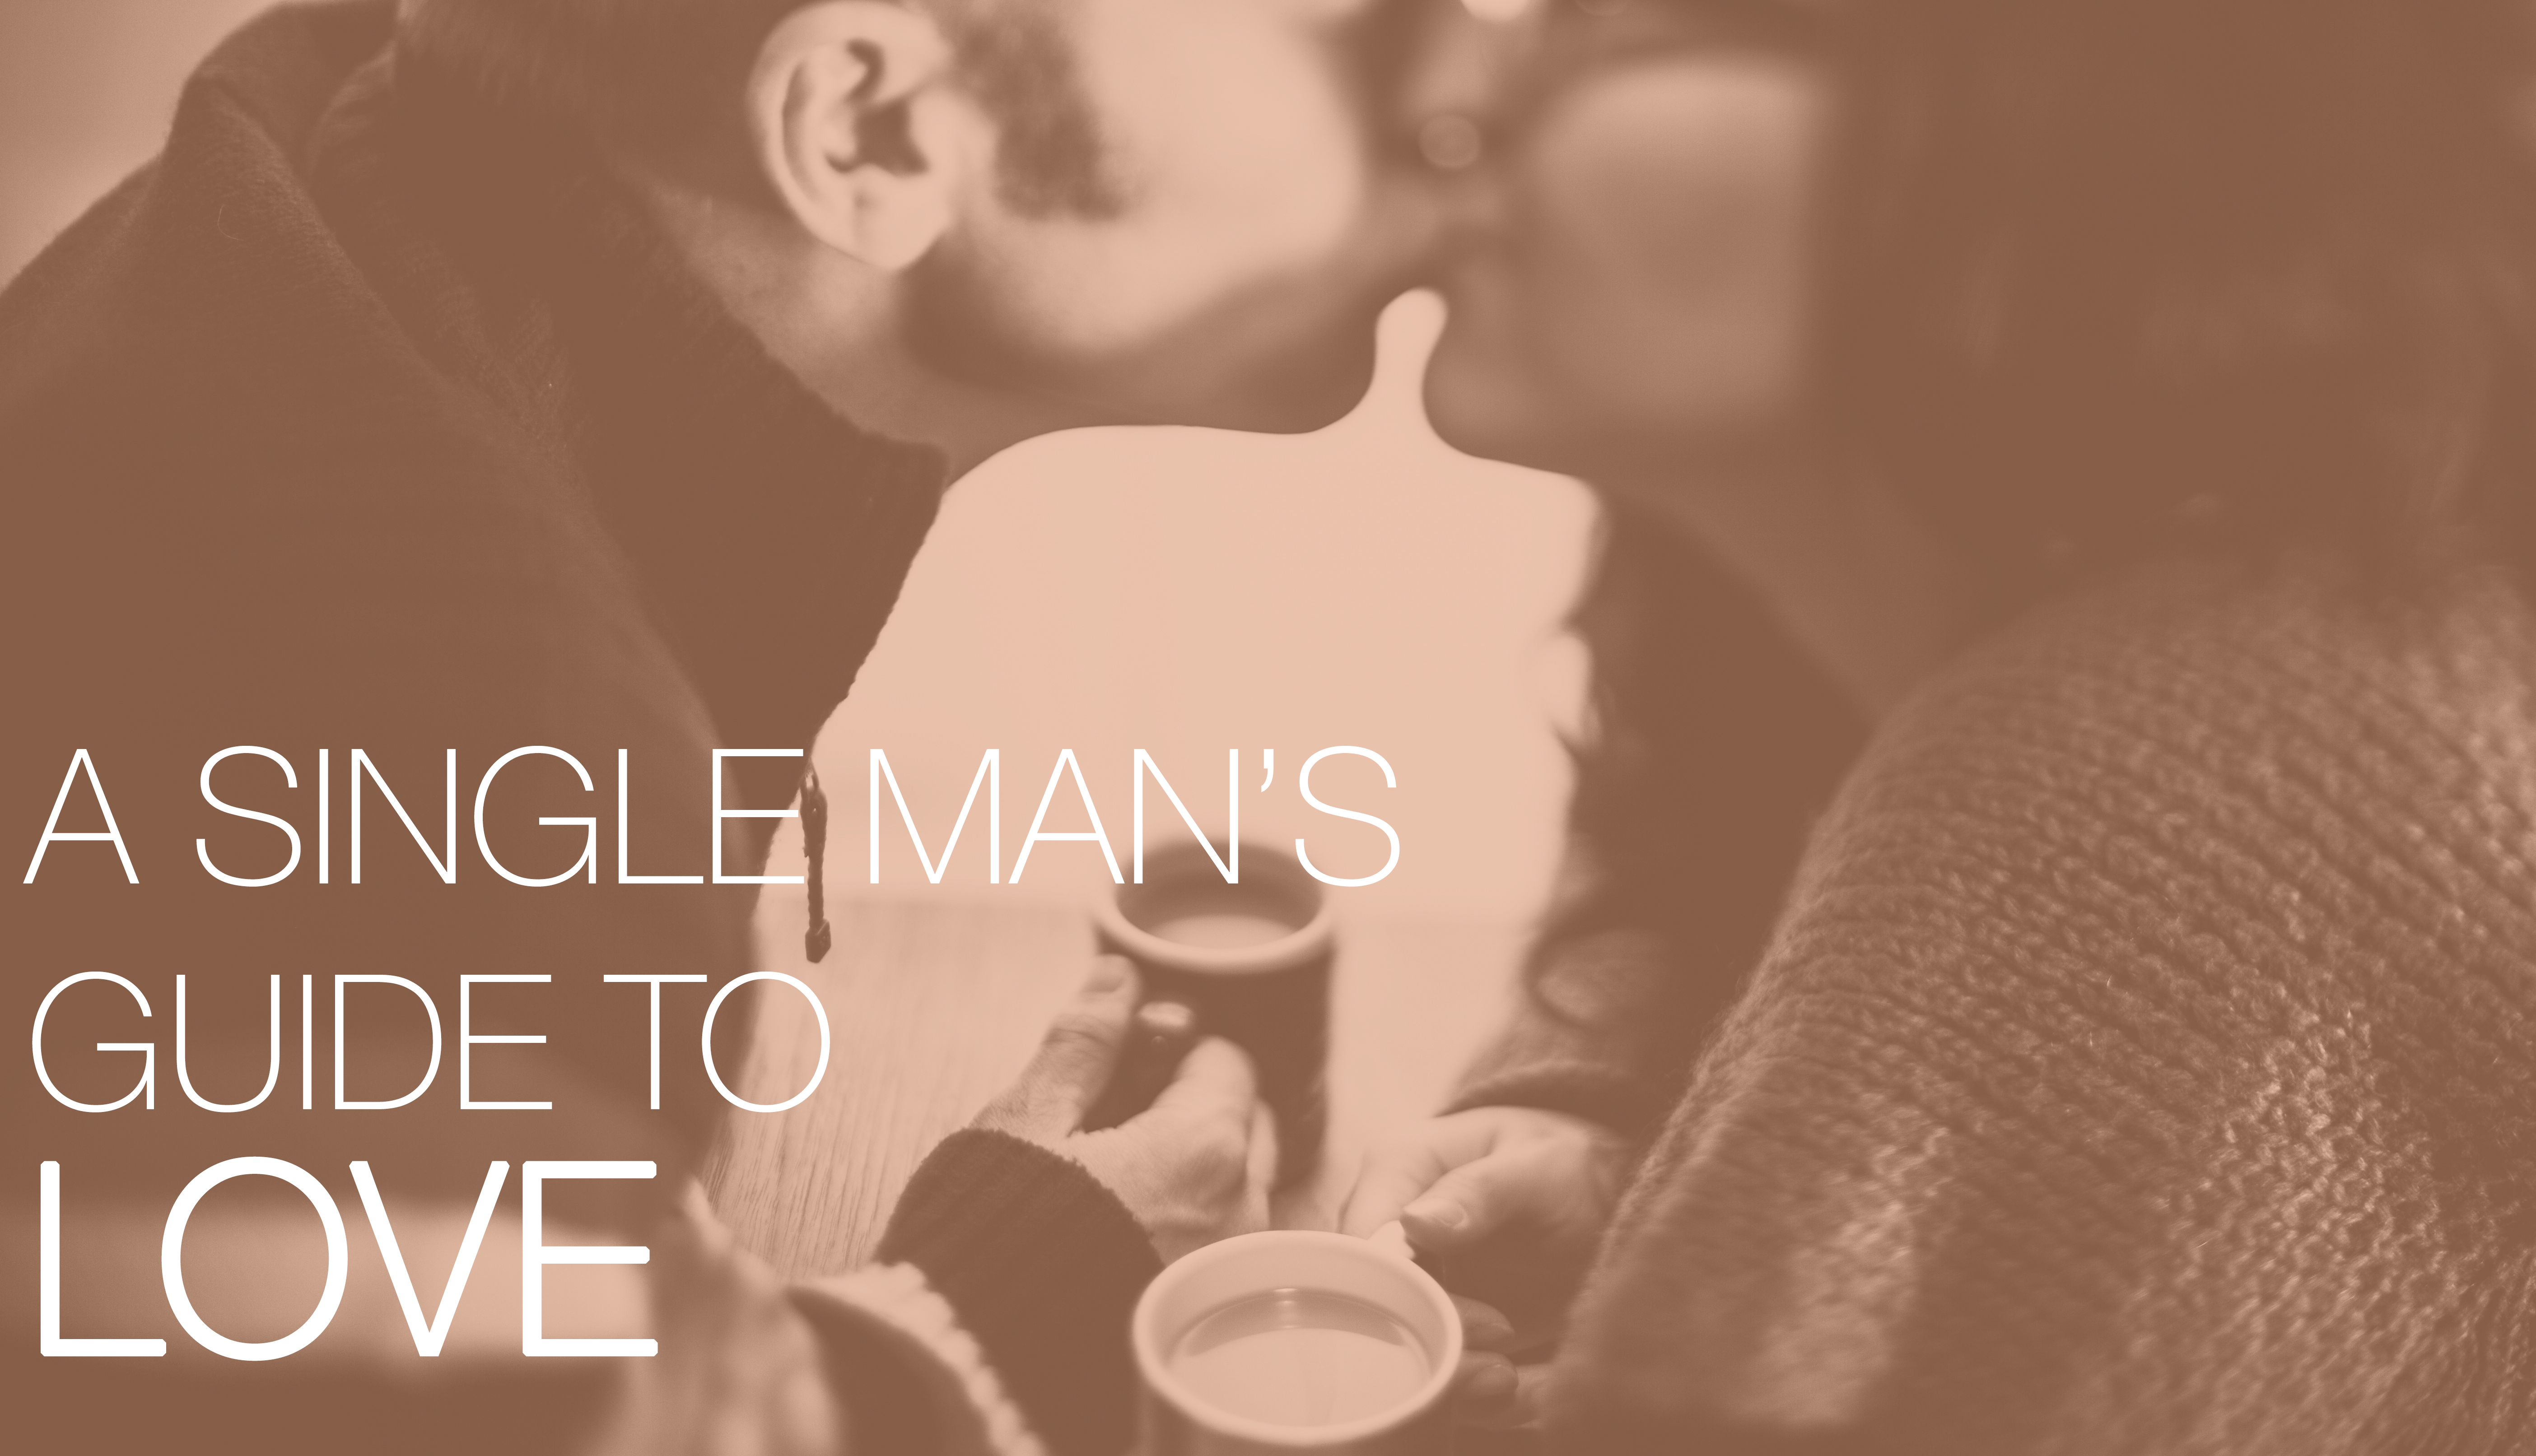 A Single Man’s Guide to Love